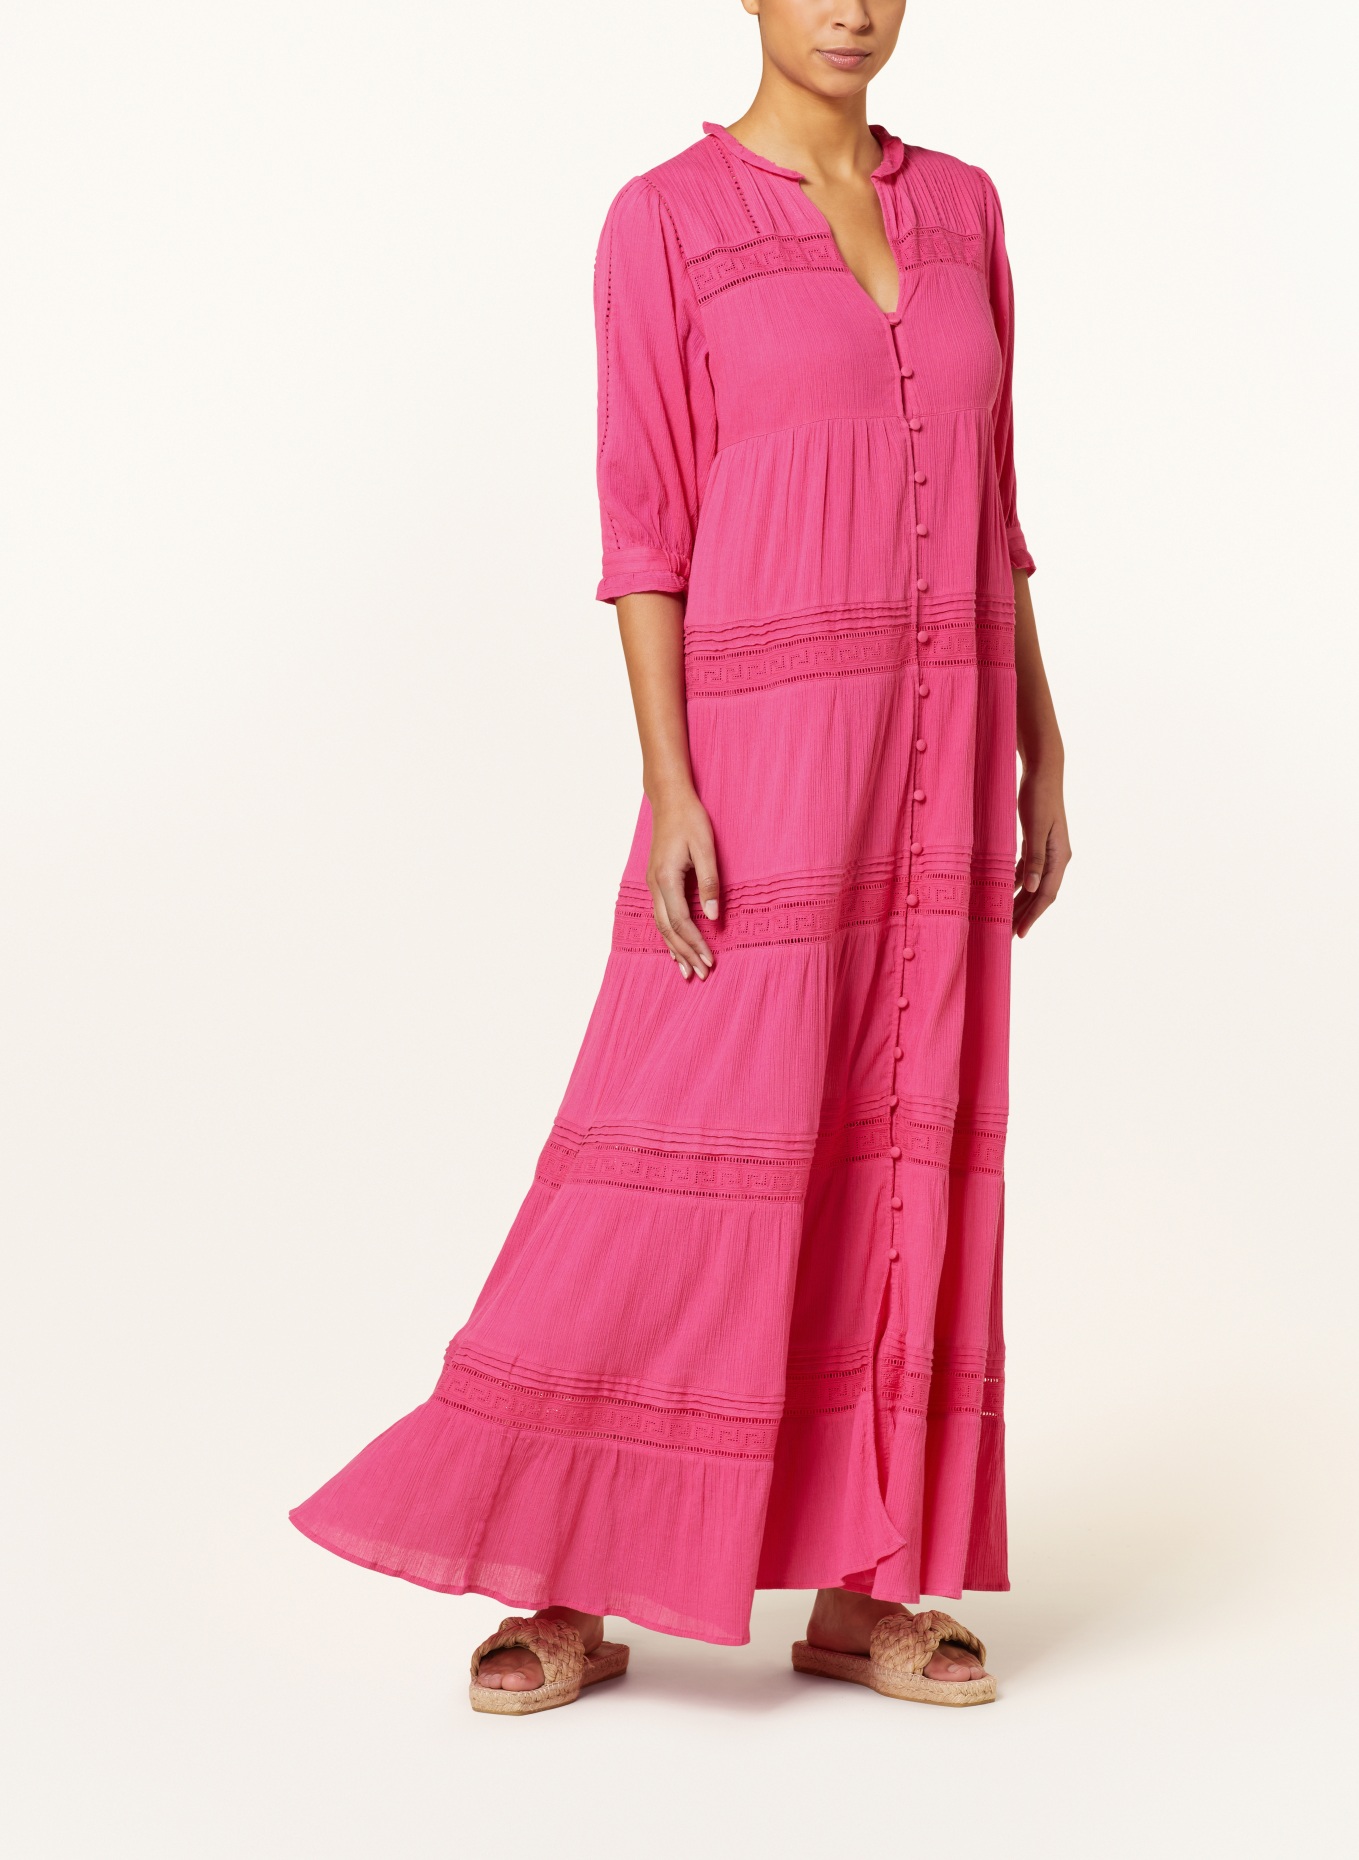 FABIENNE CHAPOT Dress KIRA with 3/4 sleeves, Color: PINK (Image 5)